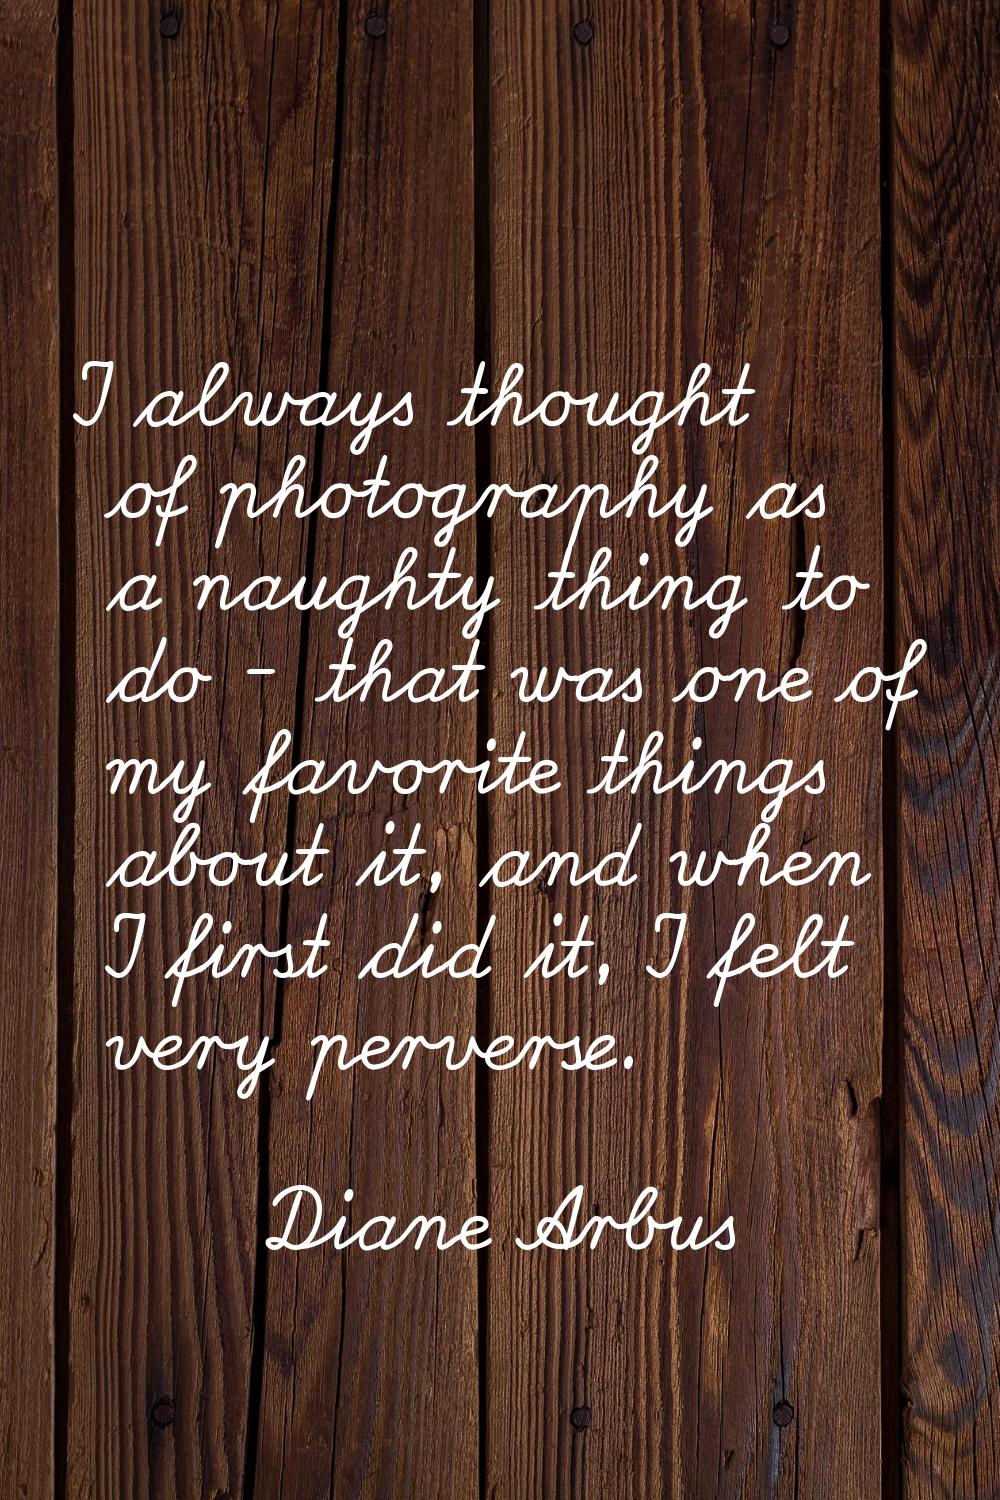 I always thought of photography as a naughty thing to do - that was one of my favorite things about